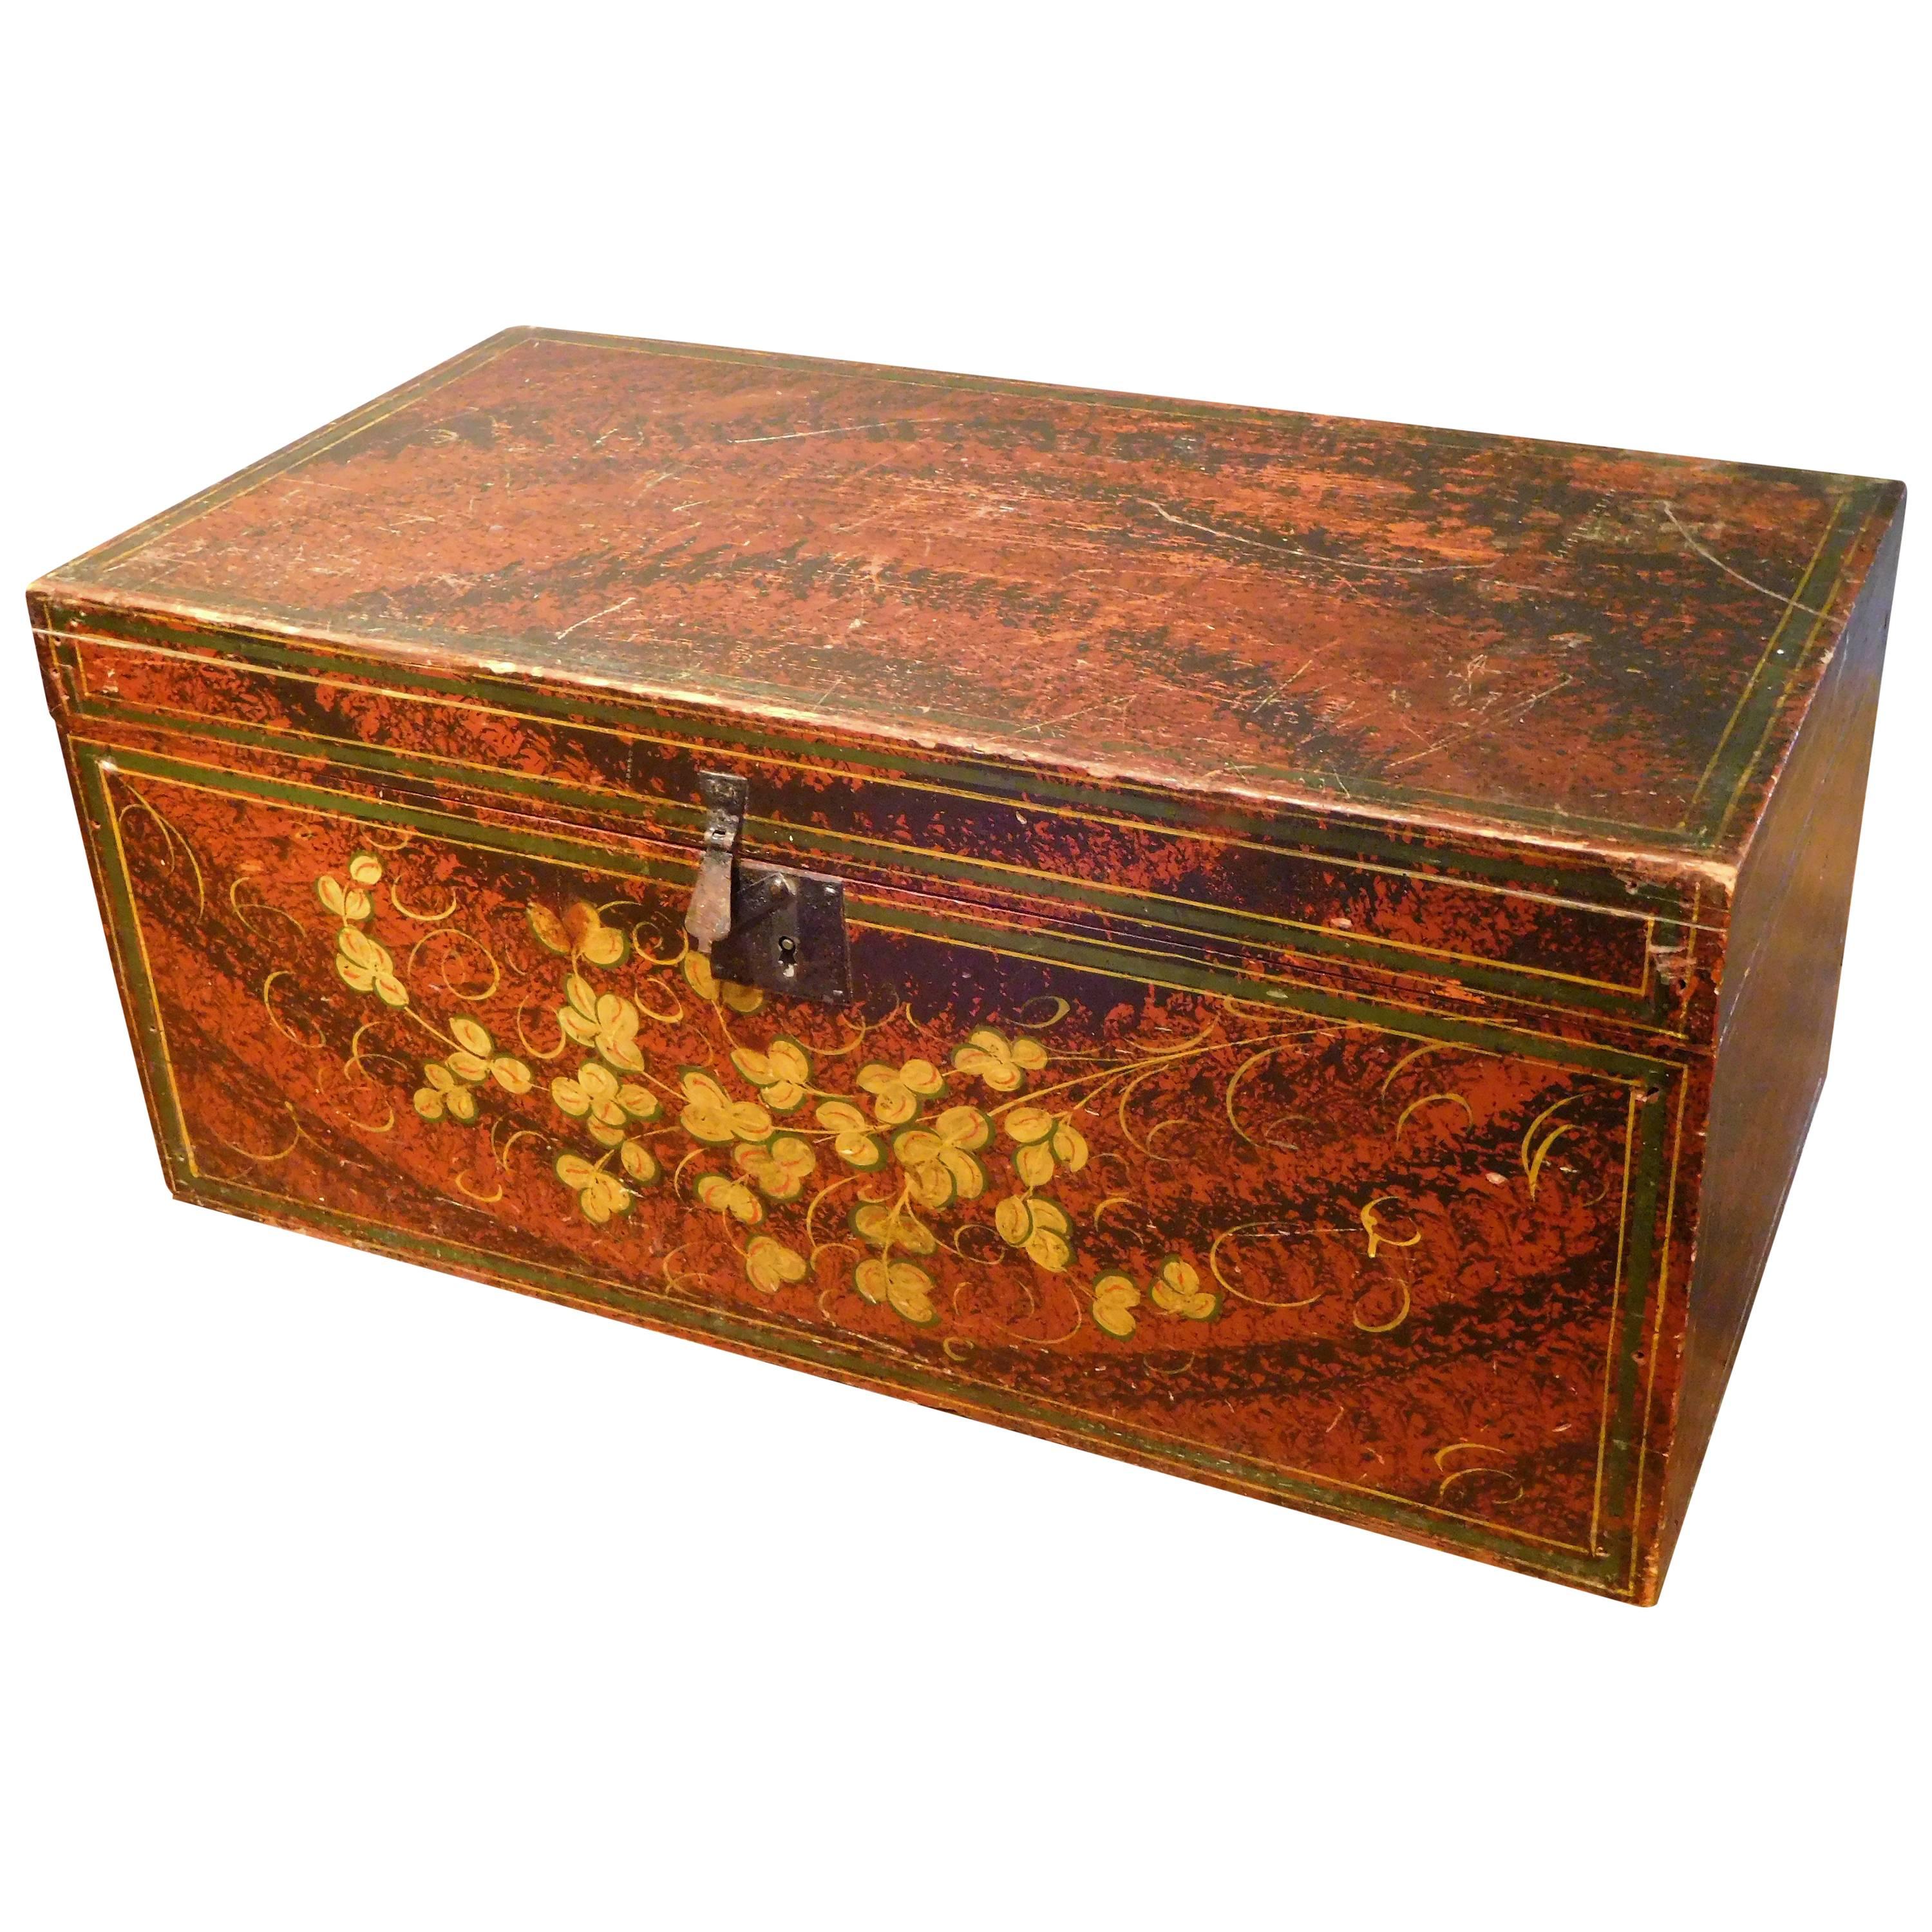 Decorated Storage or Document Box, New England Folk Art, Mid-19th Century For Sale